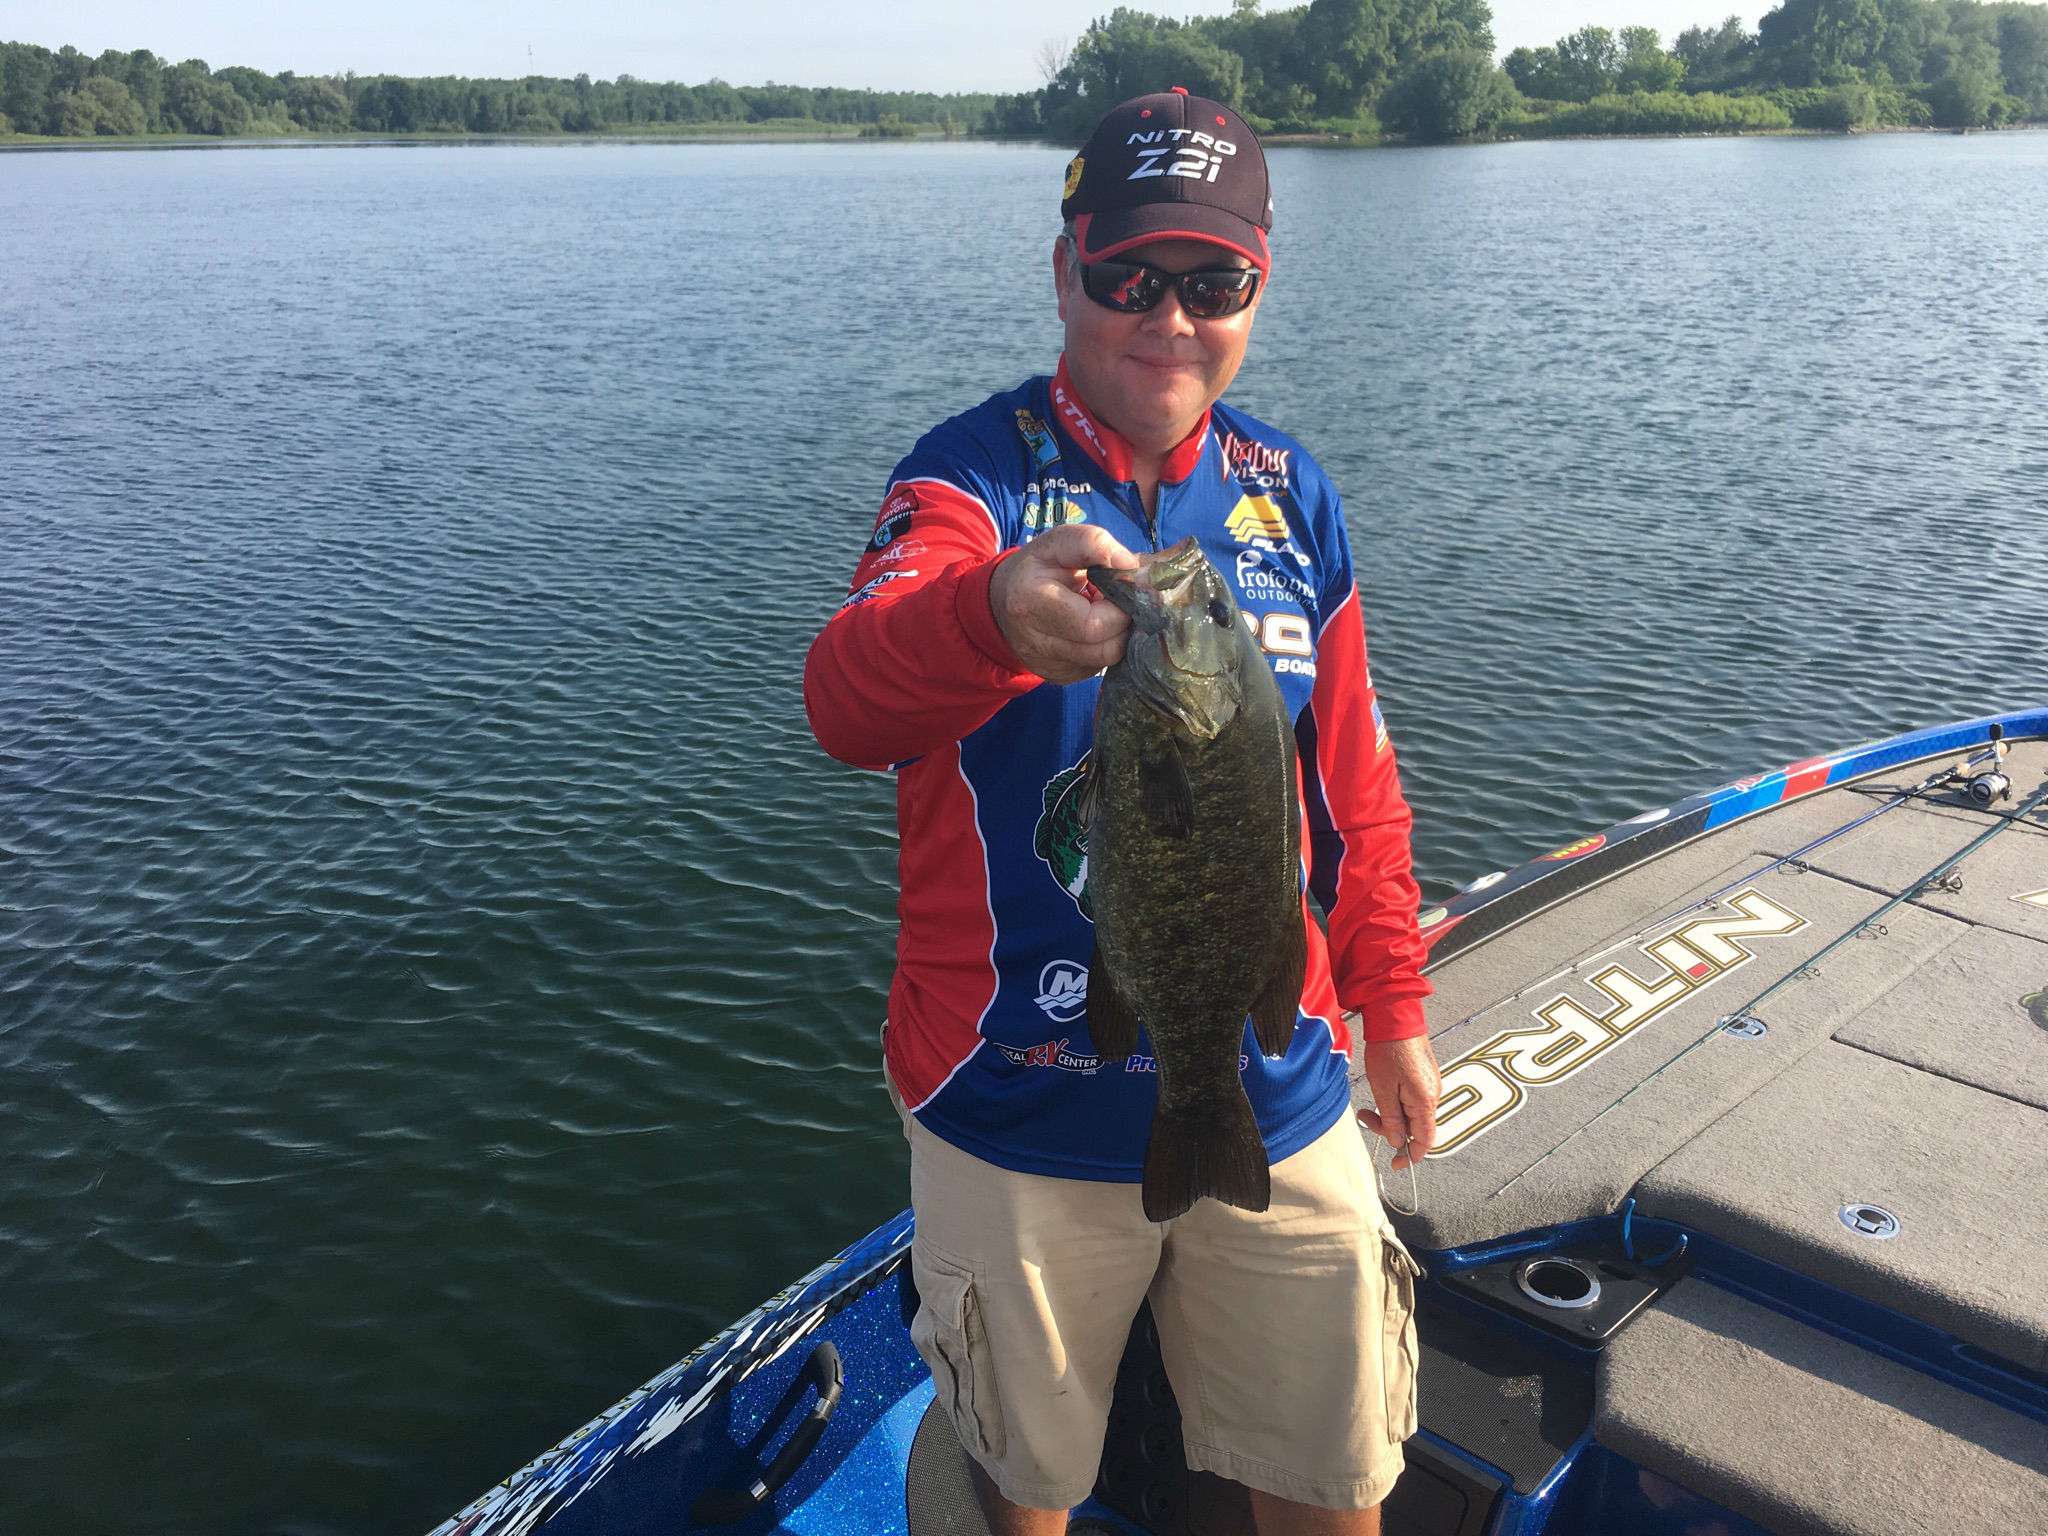 Brian Snowden with a nice 3-pound fish.